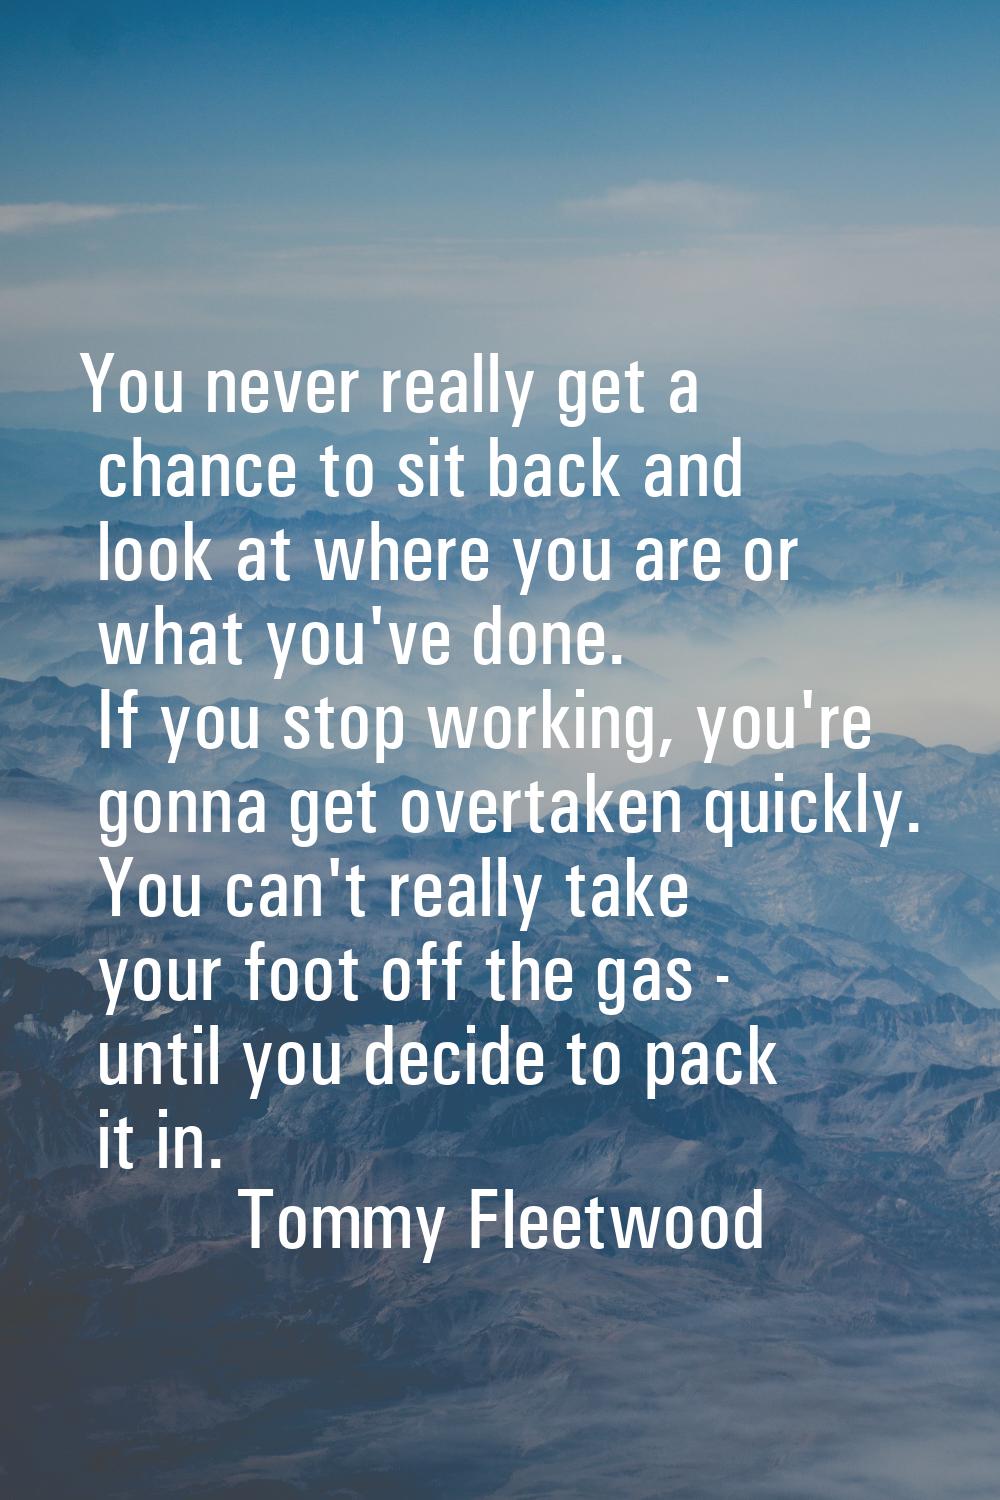 You never really get a chance to sit back and look at where you are or what you've done. If you sto